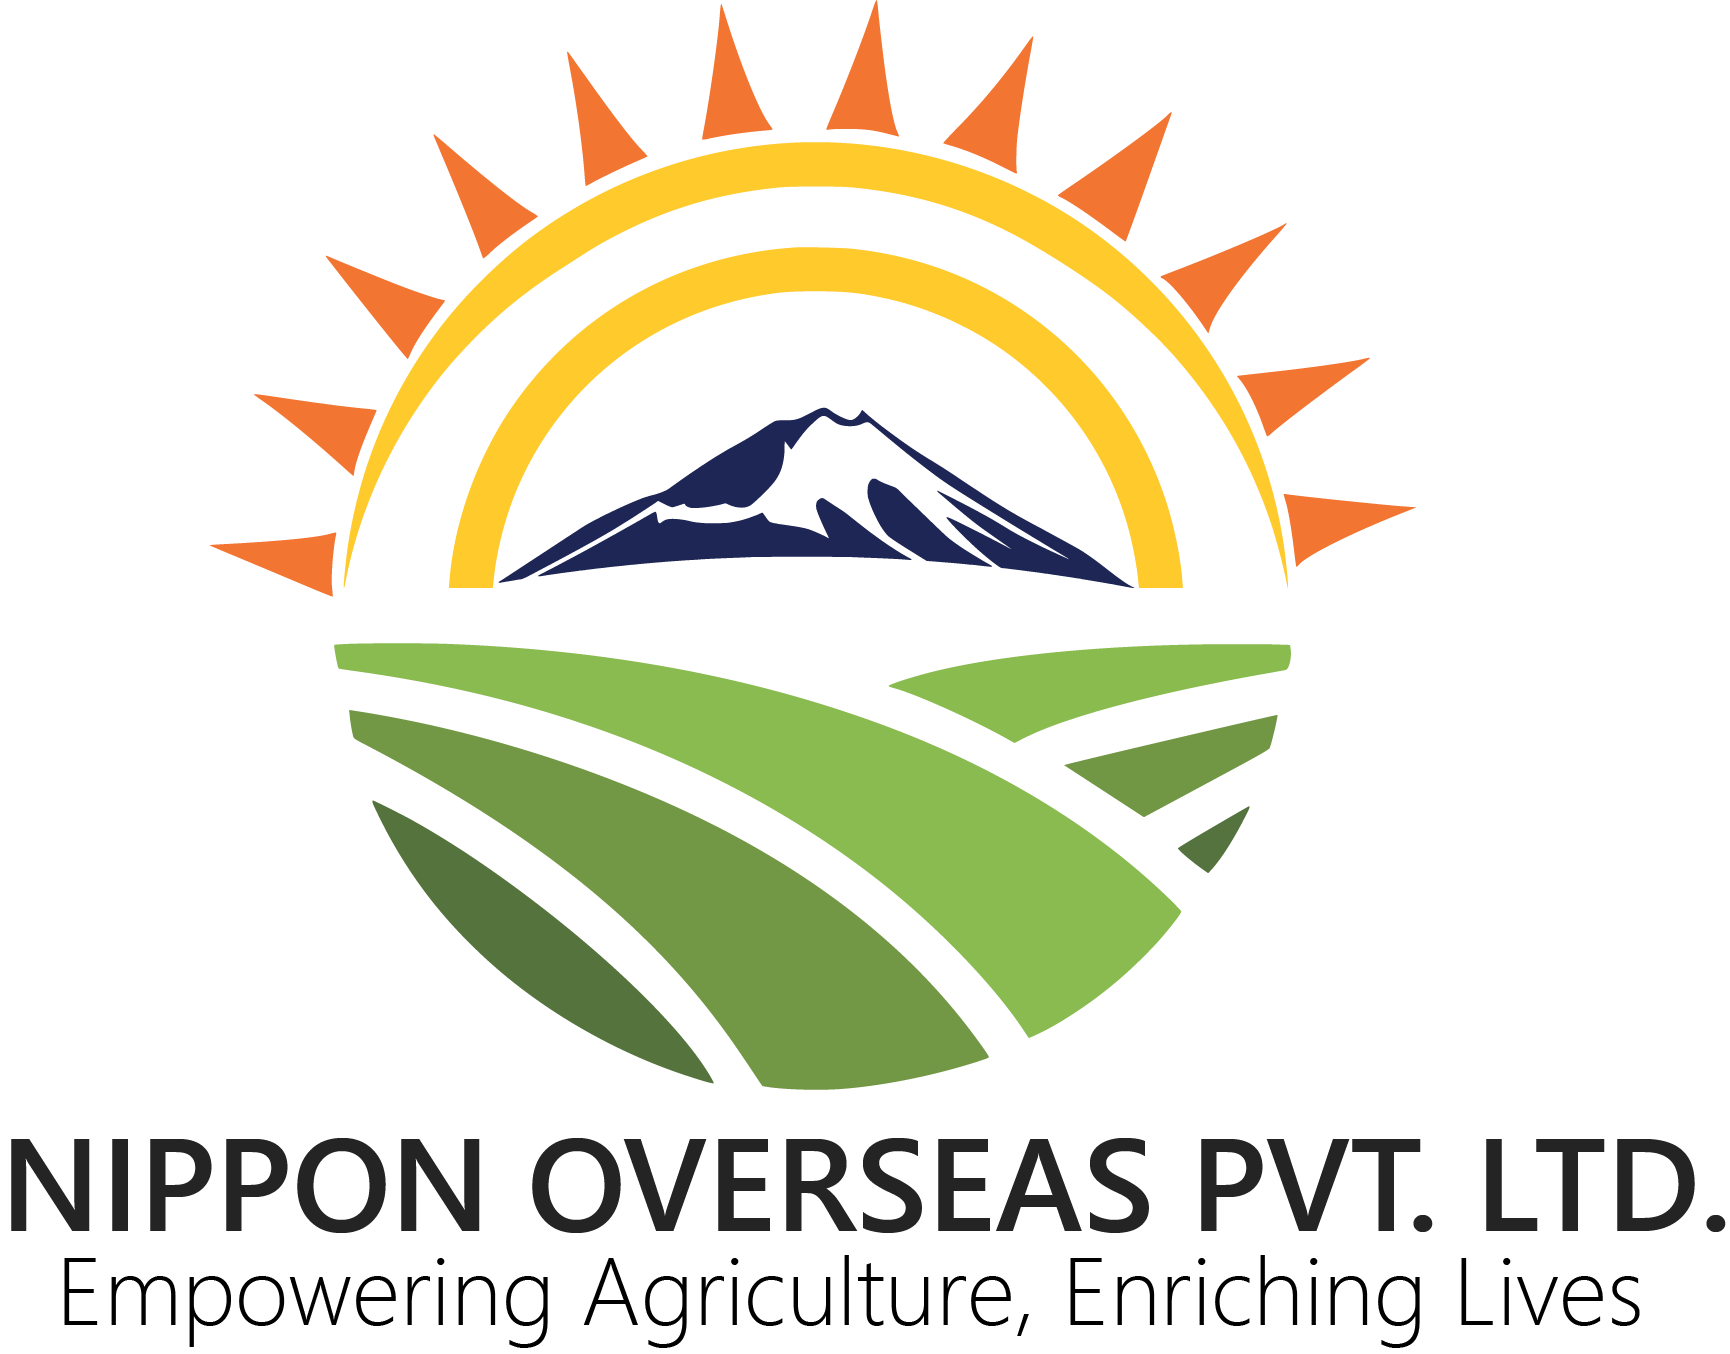 NIPPON OVERSEAS PRIVATE LIMITED